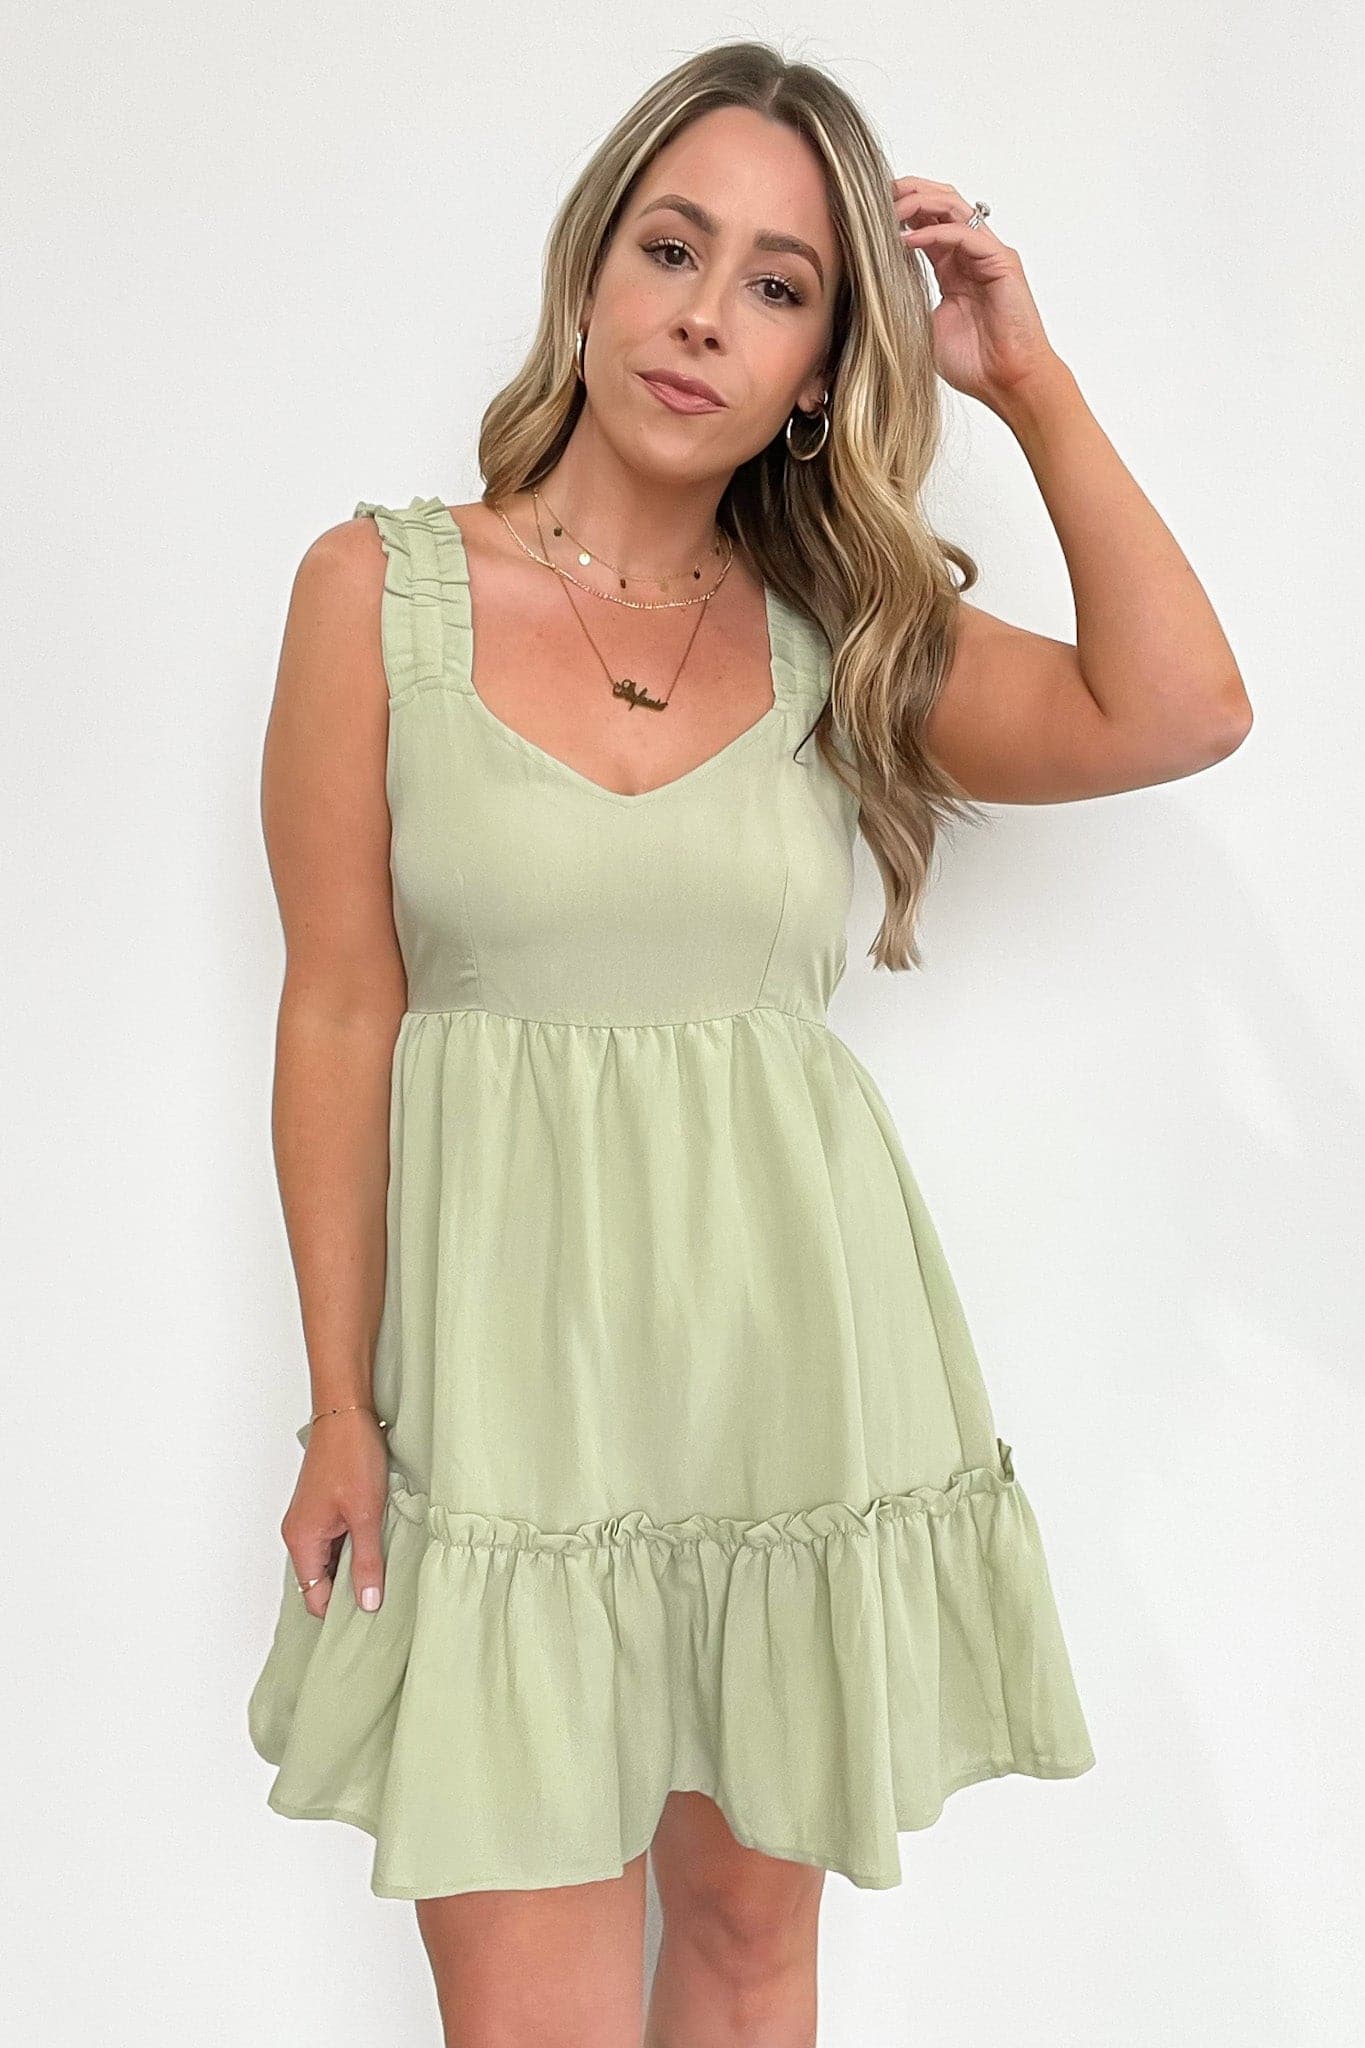  Perfectly Pleased Tiered Ruched Strap Dress - FINAL SALE - Madison and Mallory